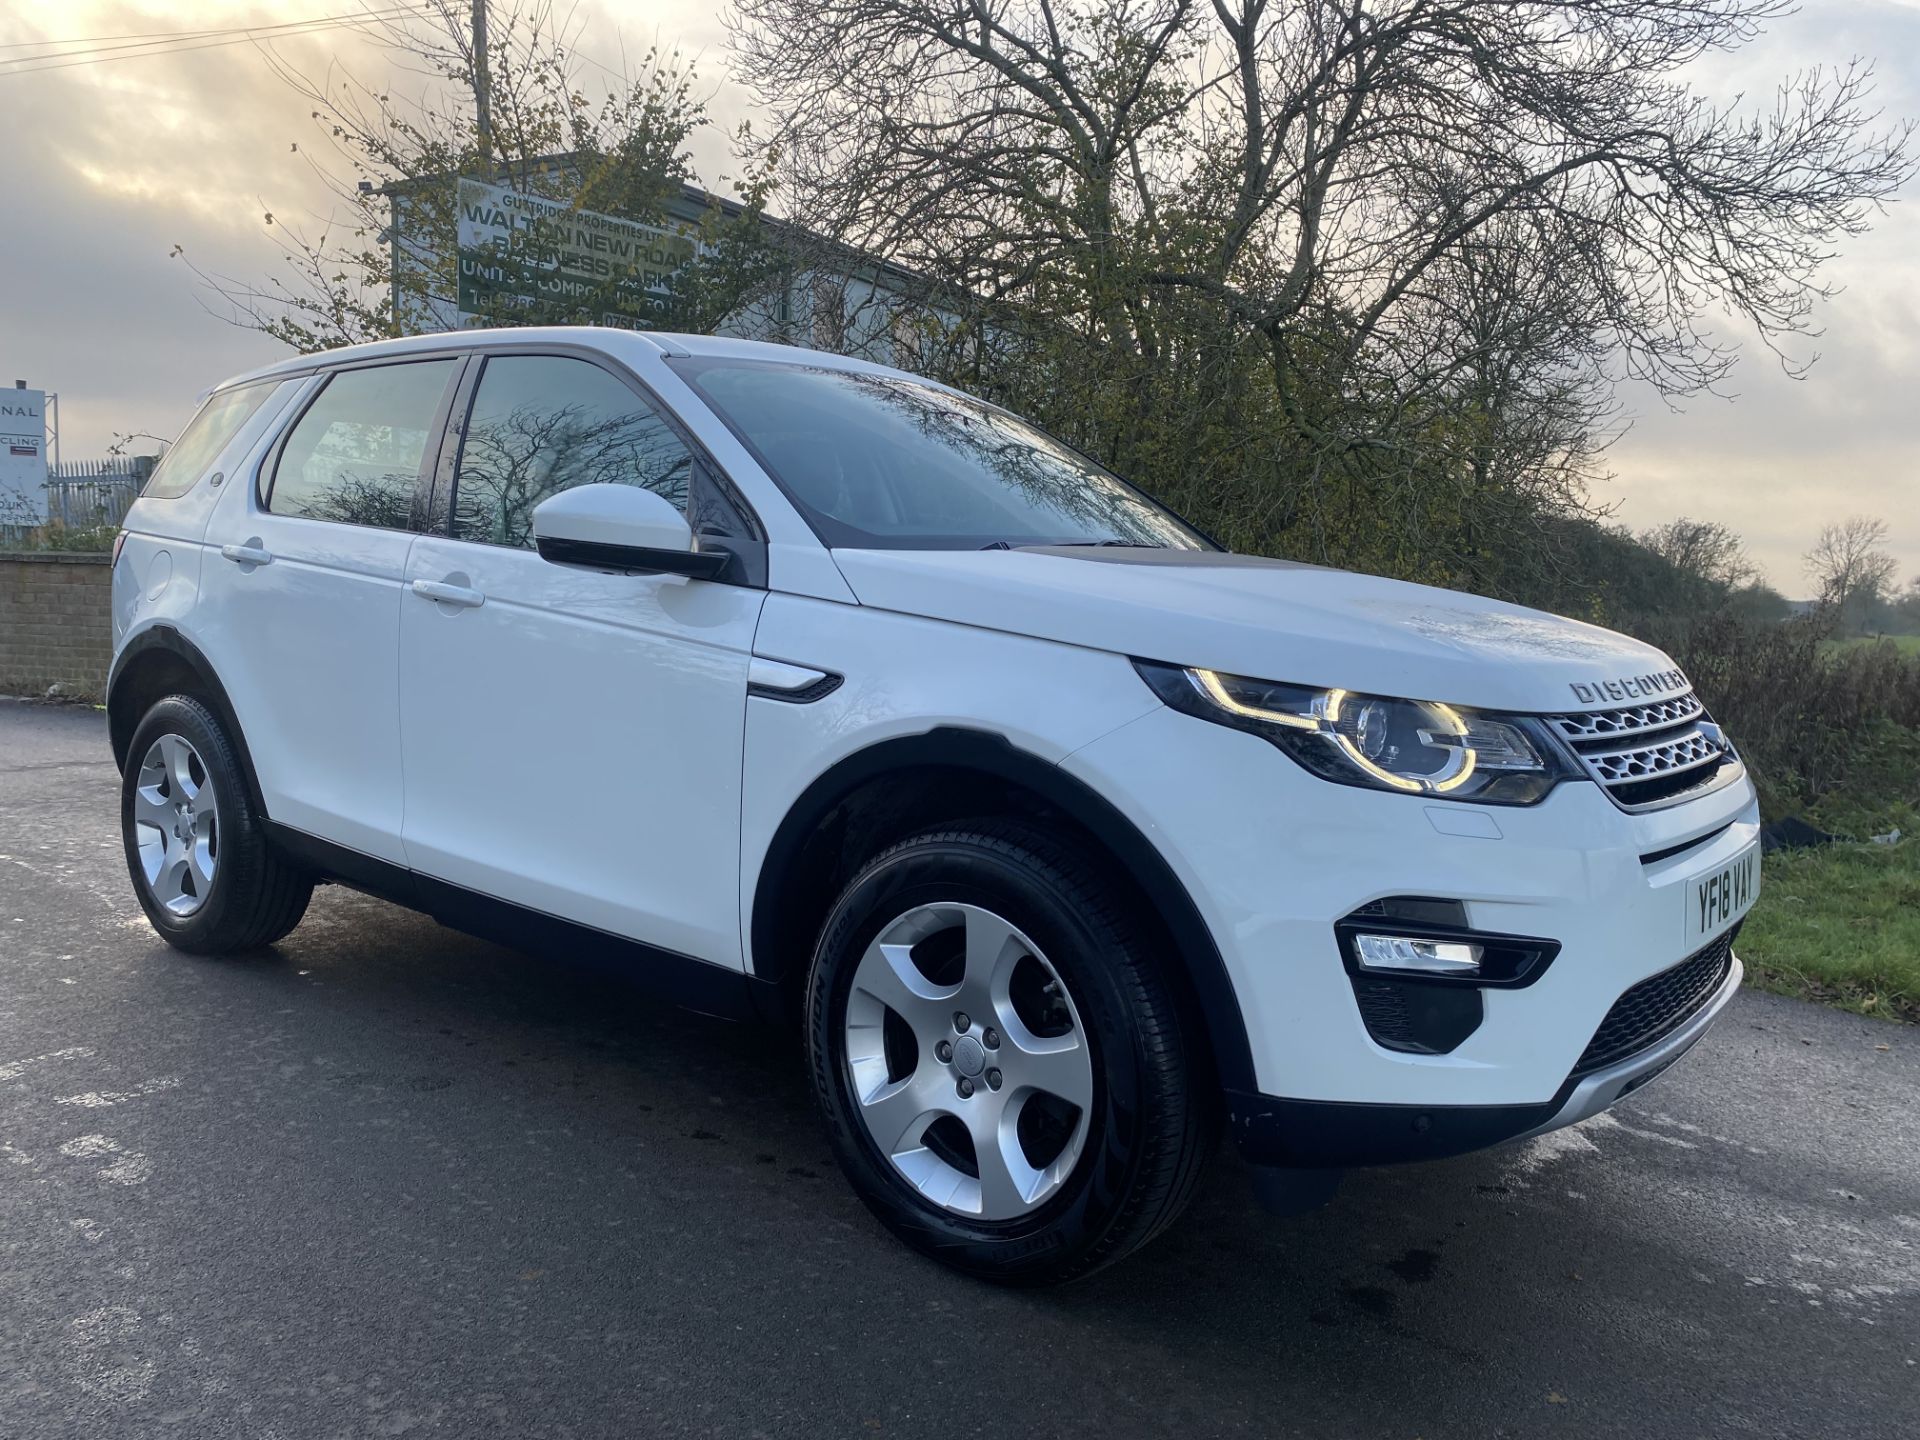 (ON SALE) LANDROVER DISCOVERY SPORT "HSE" 18 REG - 1 OWNER - LEATHER PANORAMIC ROOF - FULLY LOADED -